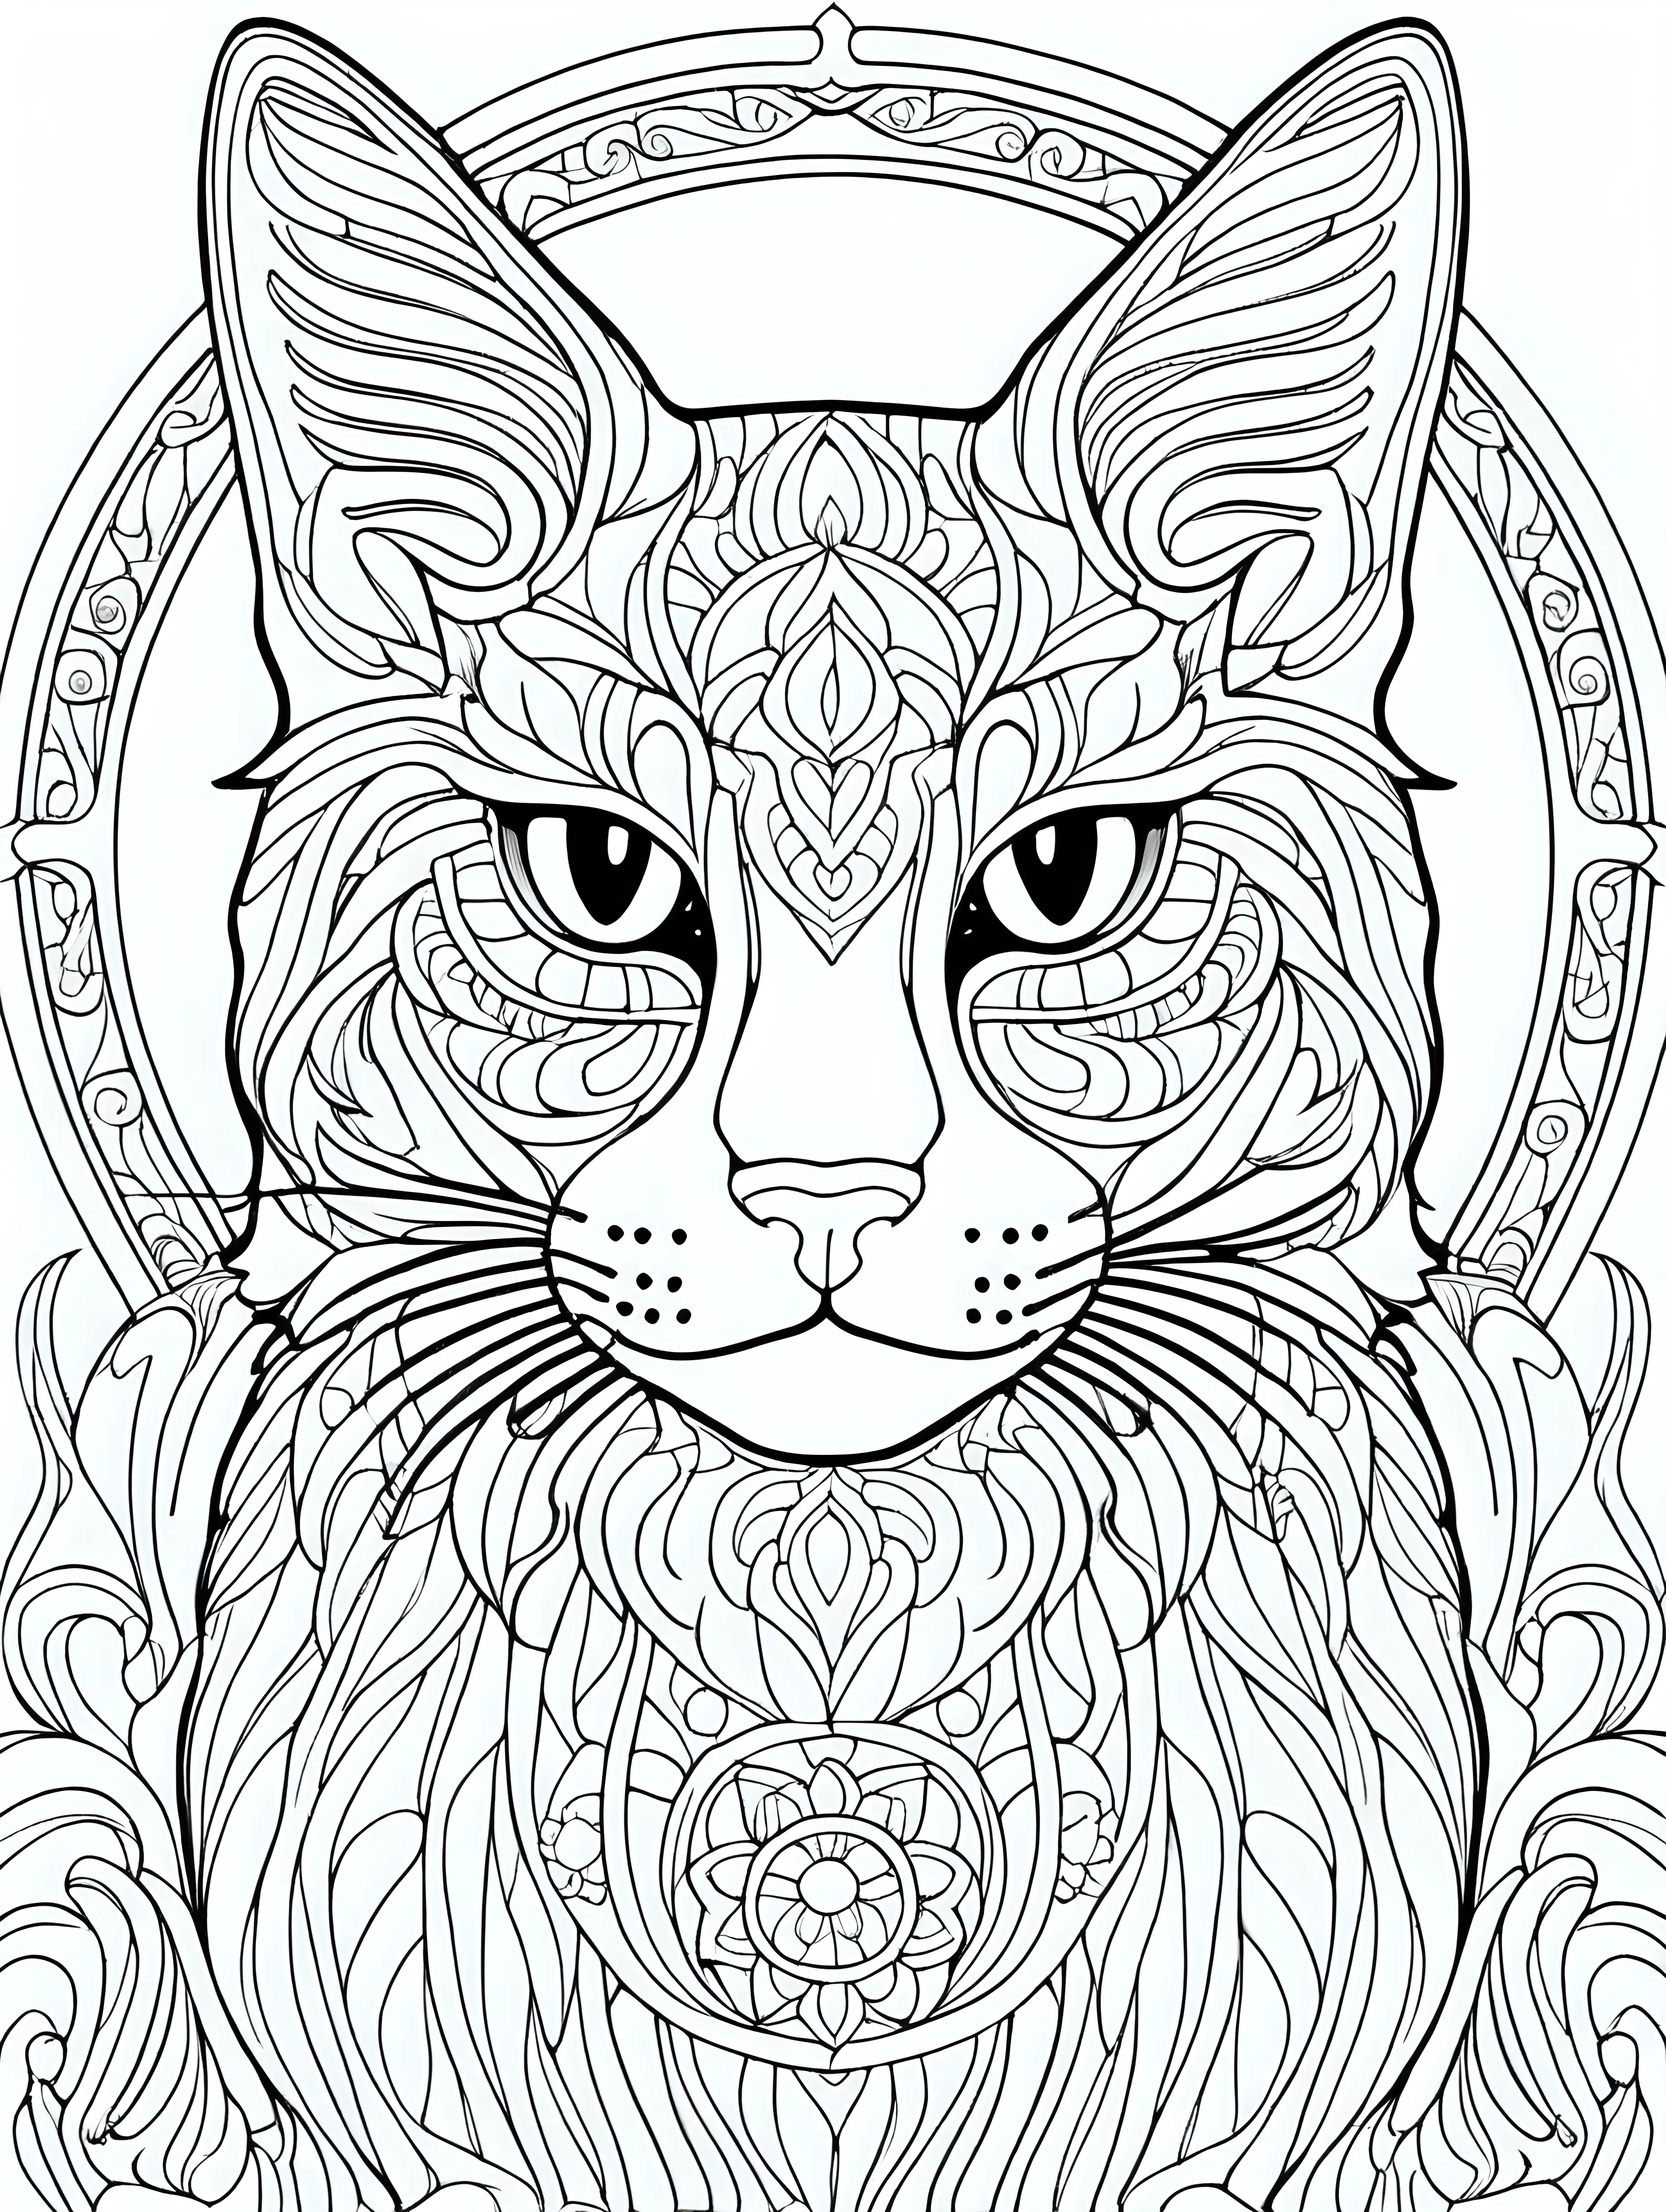 Zen Cat Mandala Coloring Book for Stress Relief and Relaxation